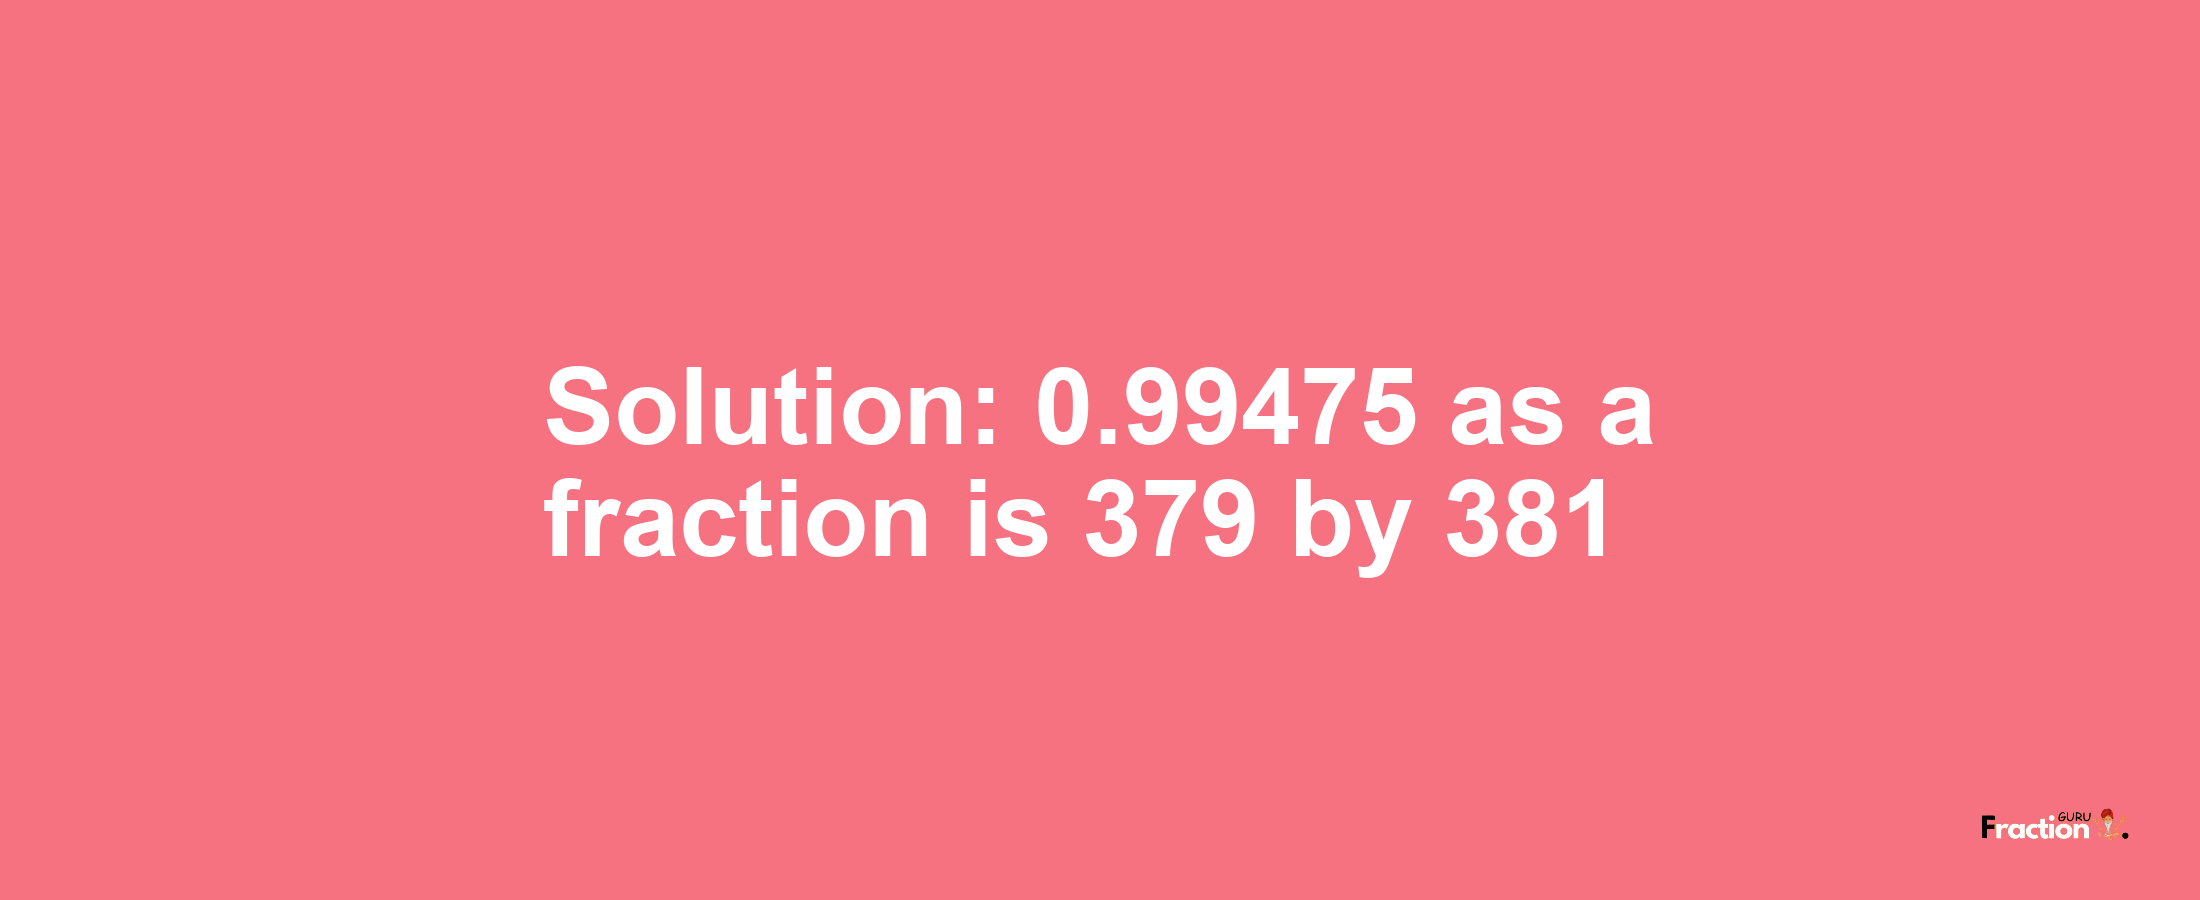 Solution:0.99475 as a fraction is 379/381